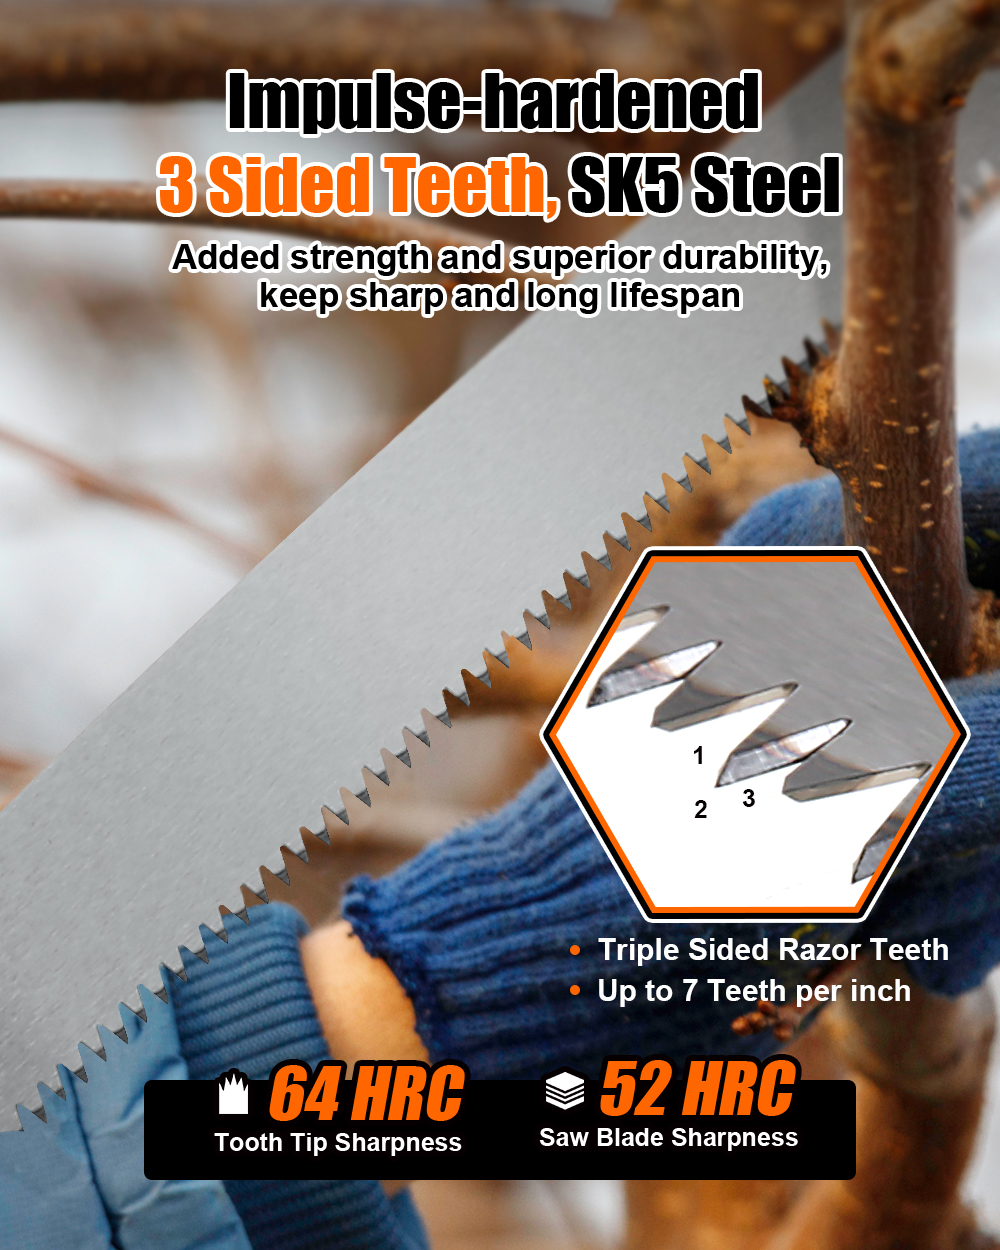 TOPSHAK TS-DS5 350mm Straight Saw Use for Gardening, Camping, Tree Trimming, Cutting Wood Branches